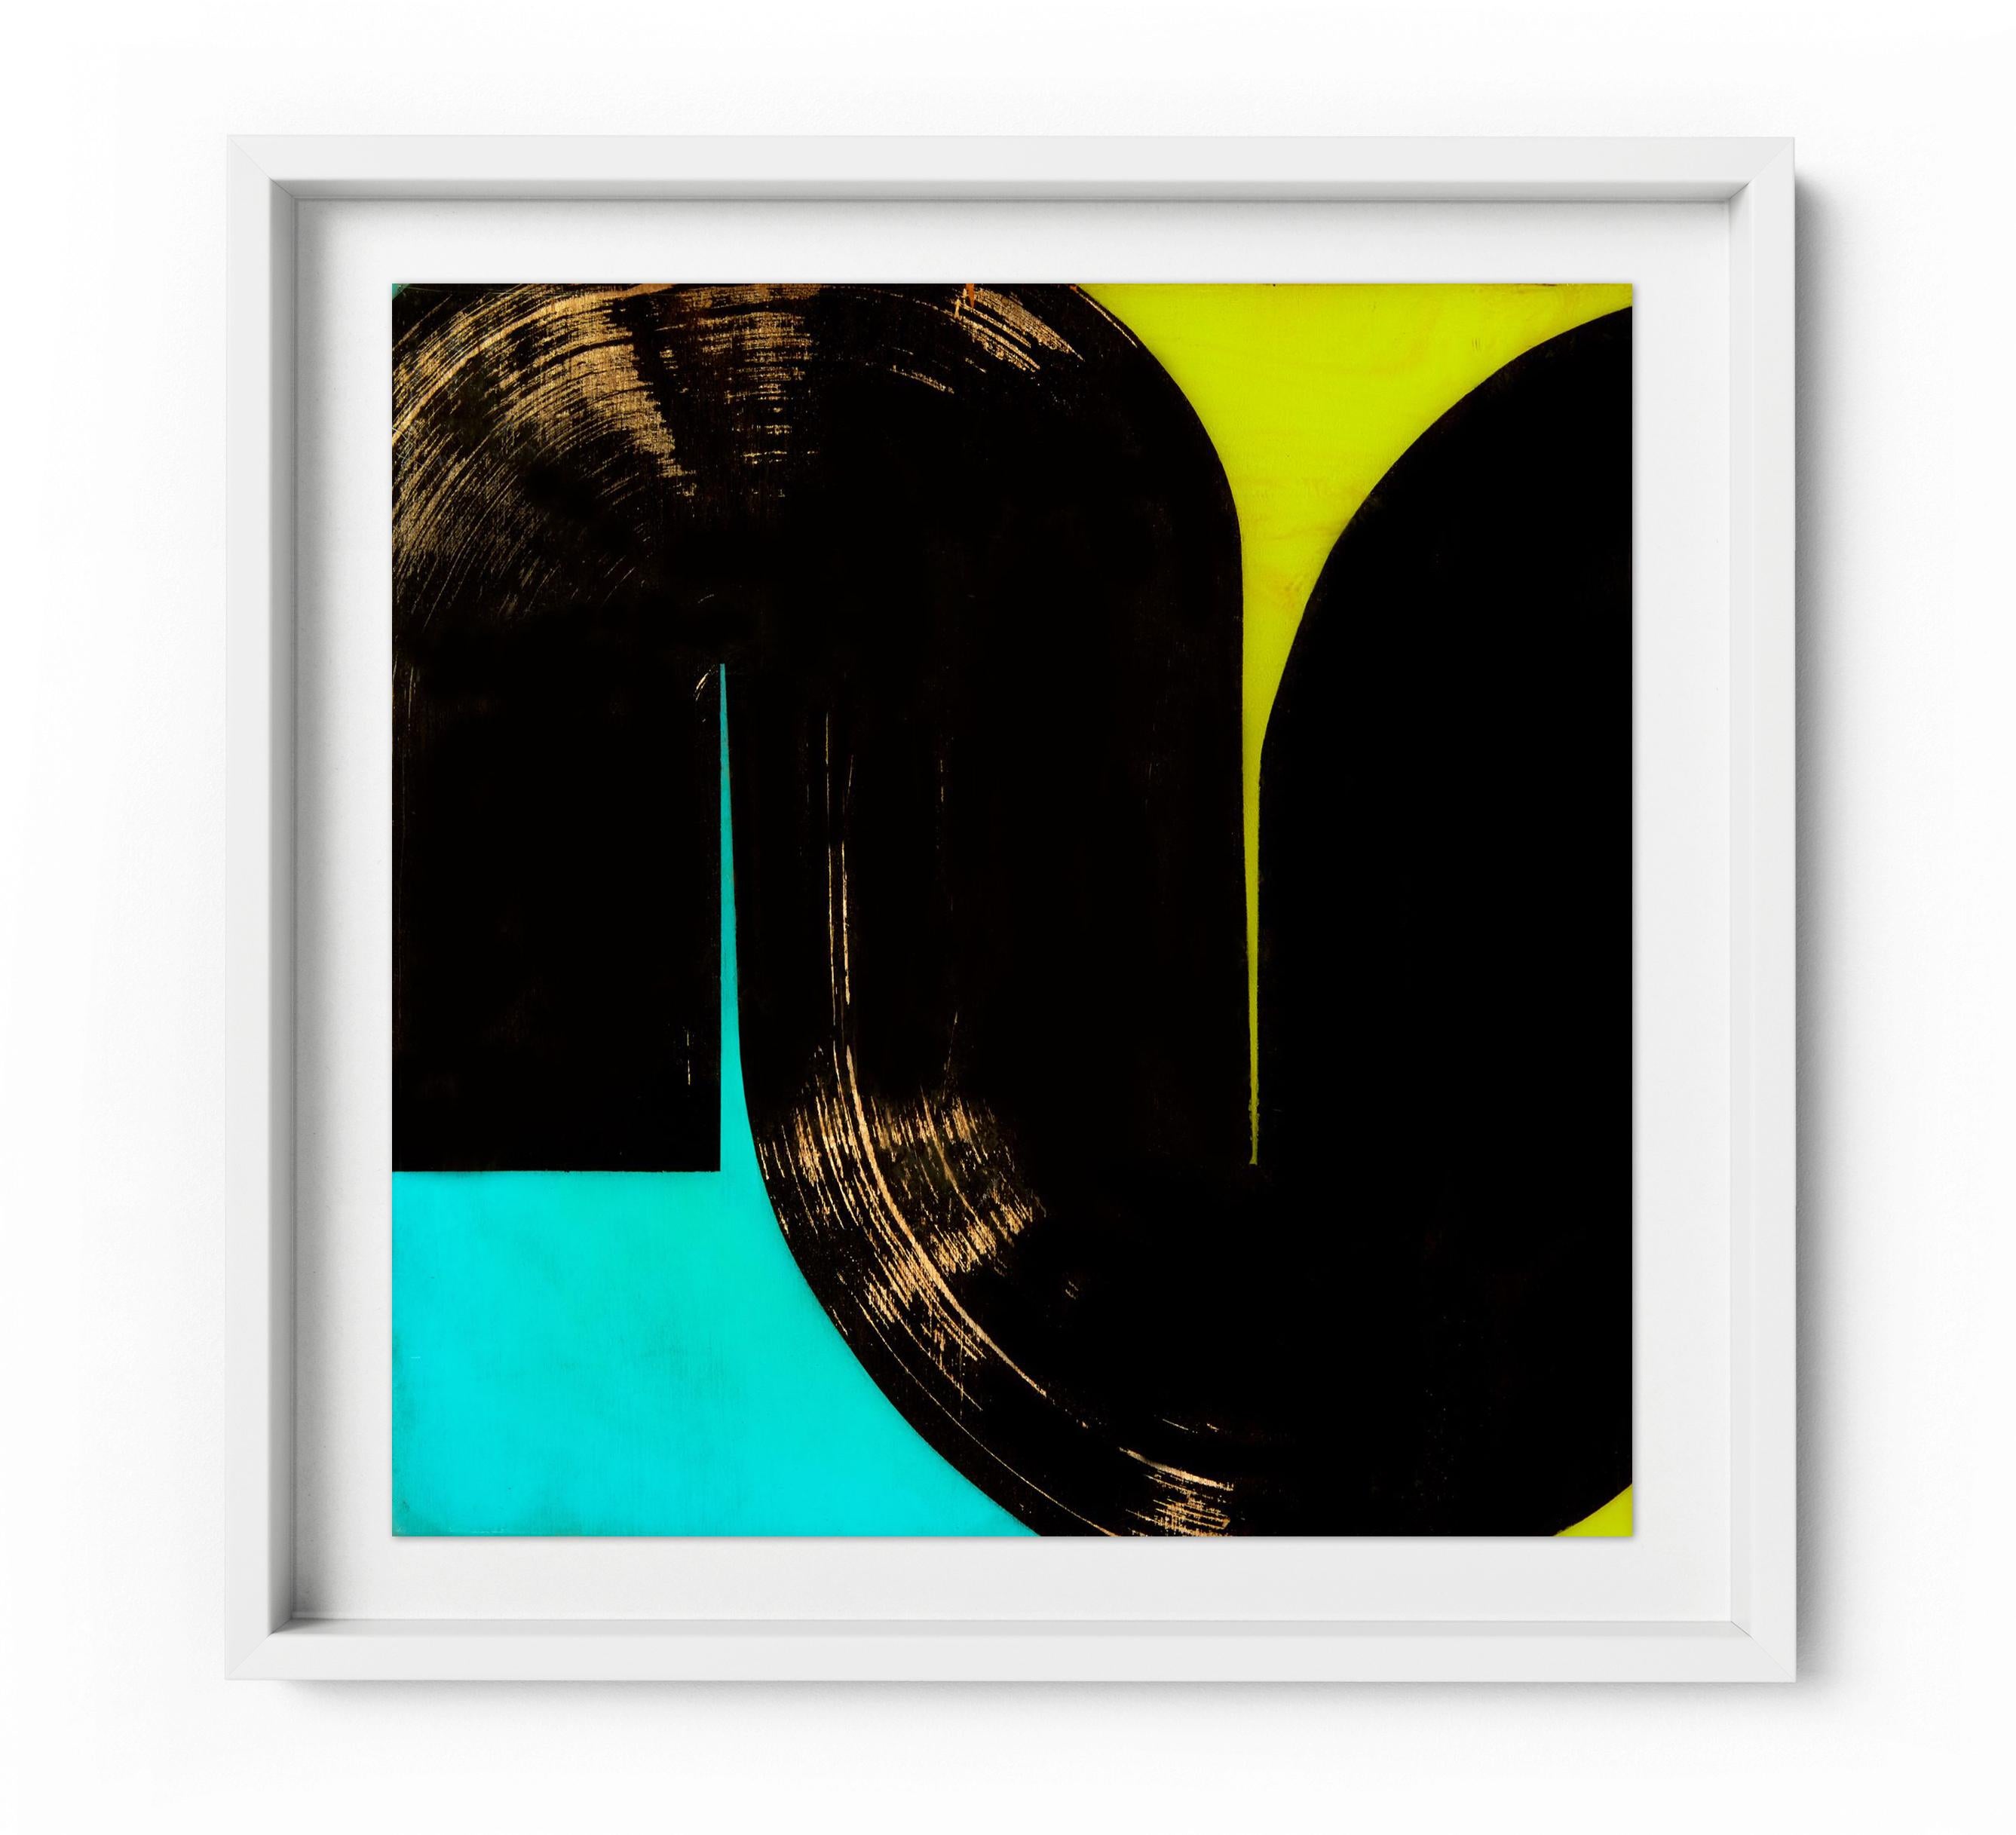 U-turn - Framed Limited Edition Print - Contemporary - Modern Abstract - Beige Abstract Print by Karlos Marquez